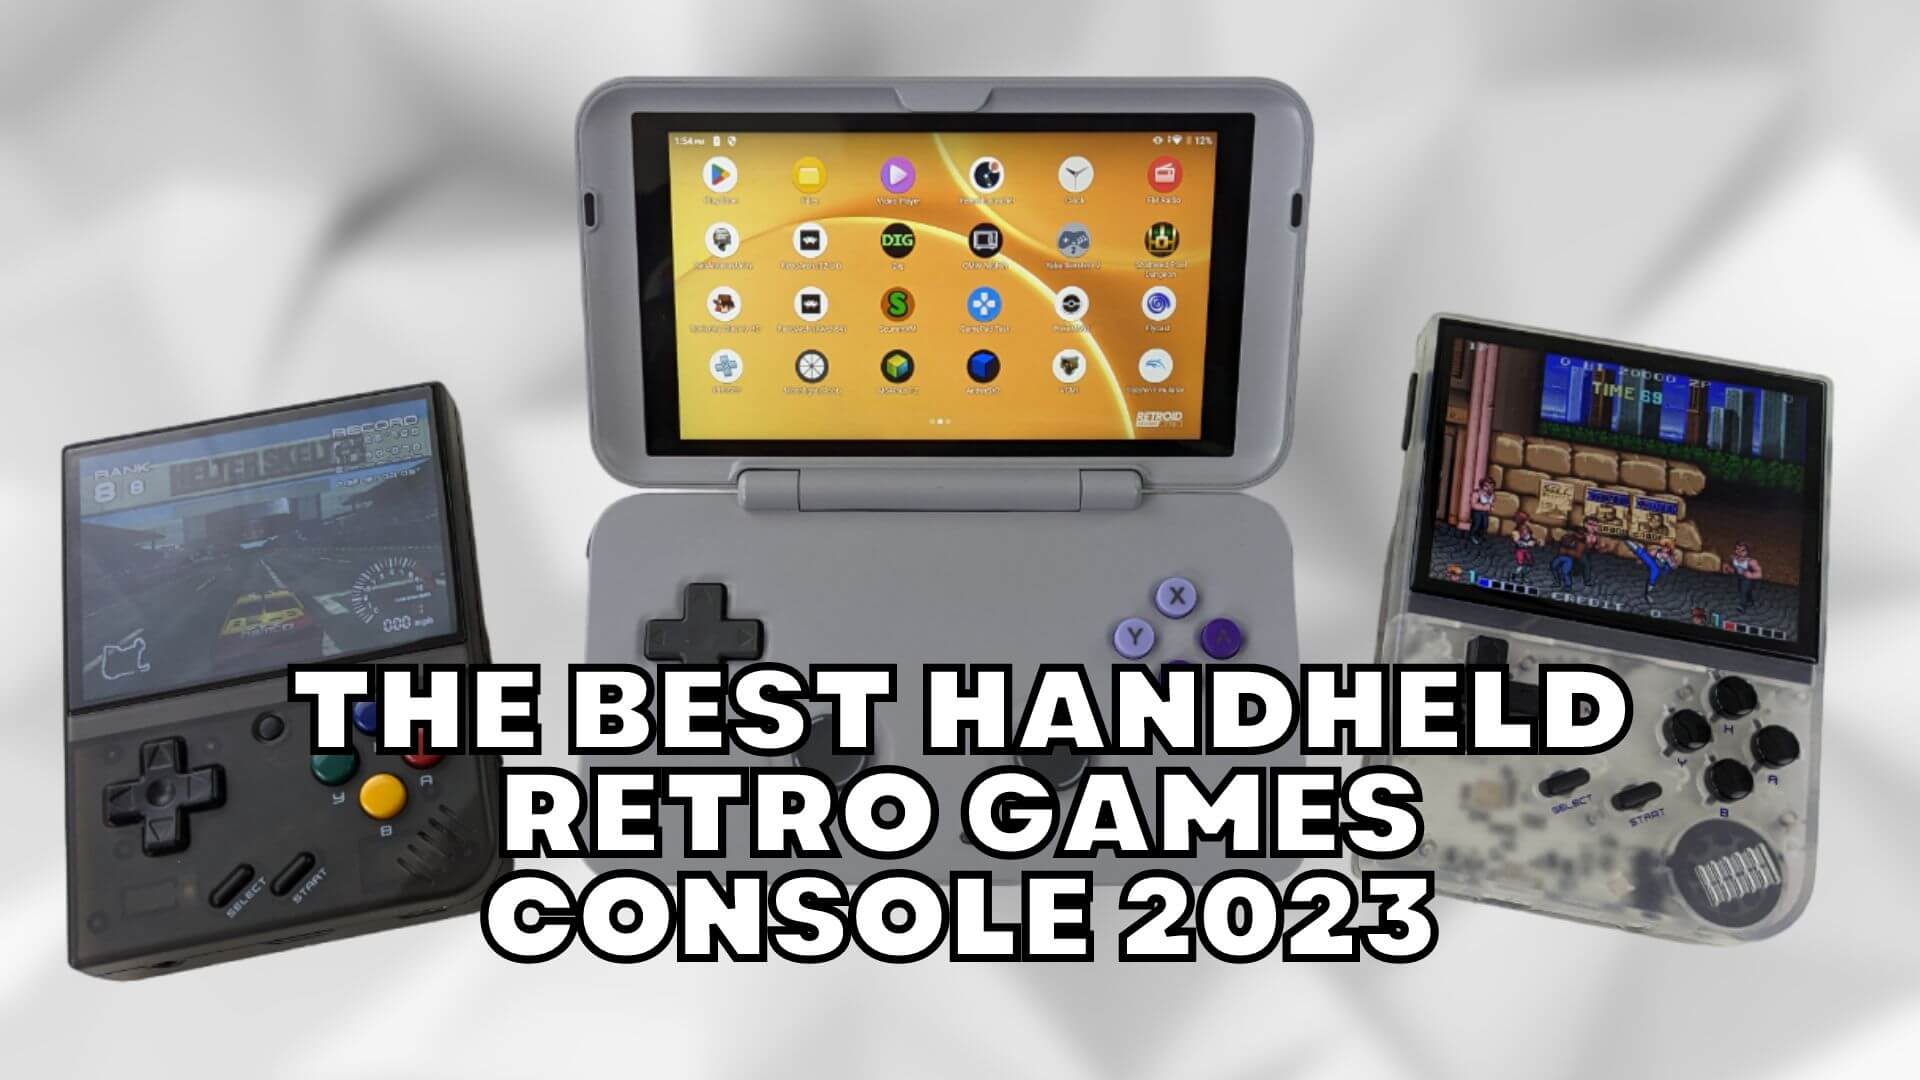 RG35XX Hands On, An All New Awesome Low-Cost Retro Emulation Handheld 